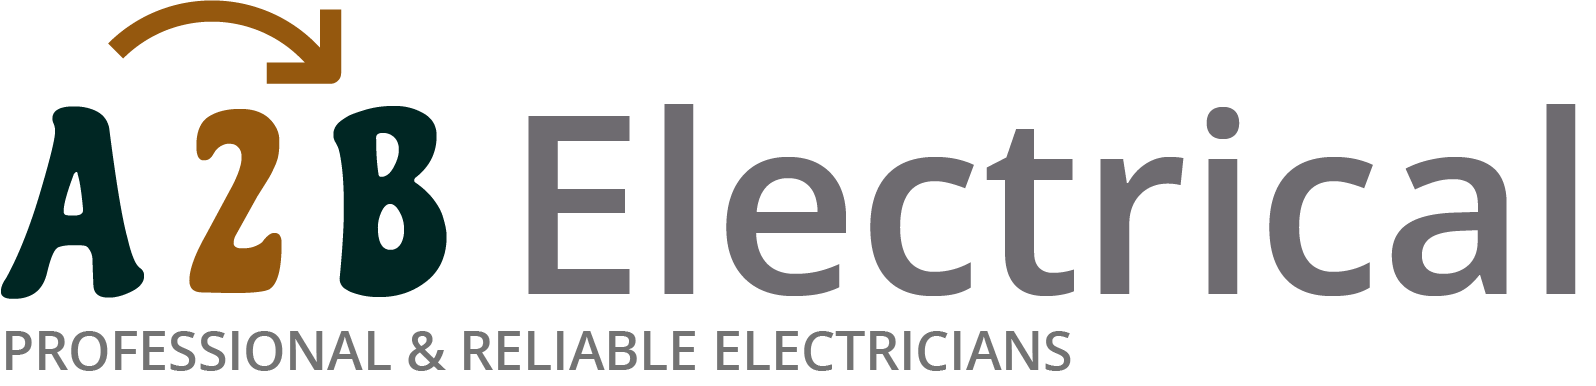 If you have electrical wiring problems in Welling, we can provide an electrician to have a look for you. 